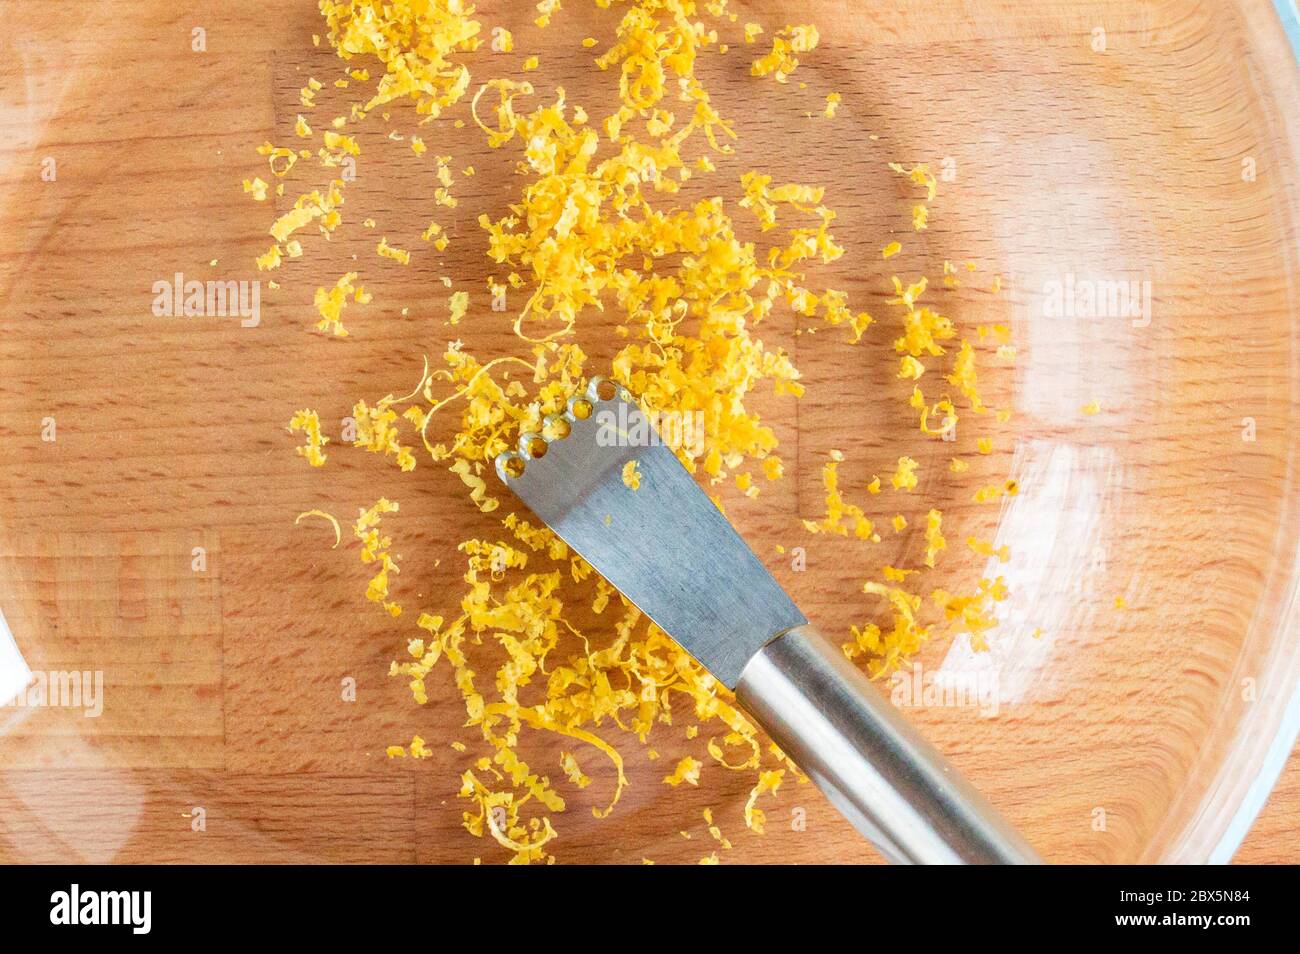 Knife for zest. Finely chopped lemon zest in a transparent bowl. Small hole knife. Stock Photo